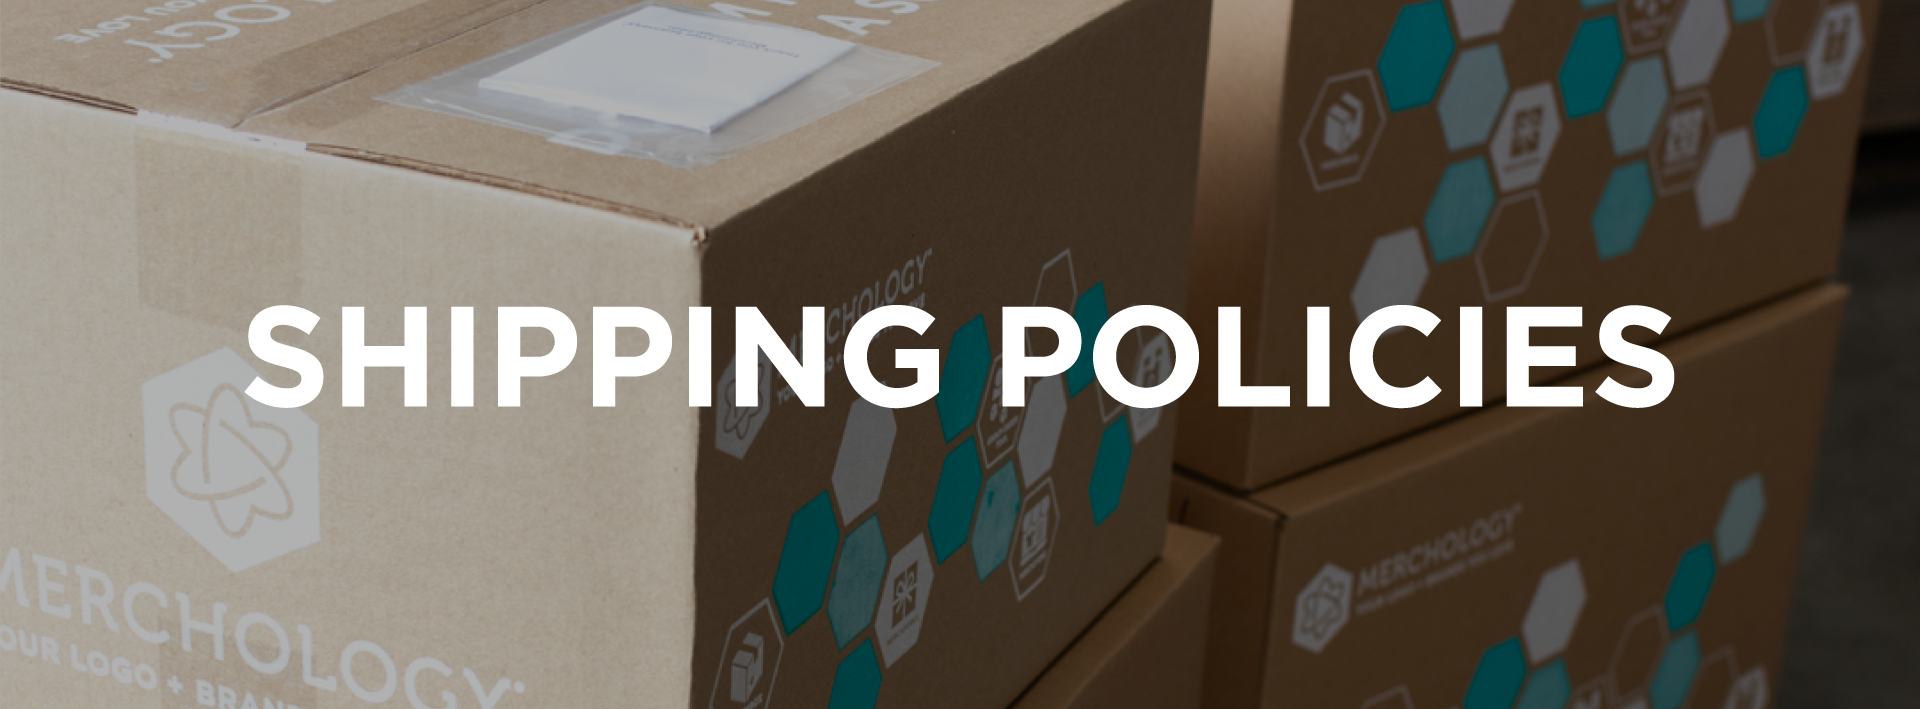 Learn more about Merchology's shipping options and policies for your perfect corporate gift order!